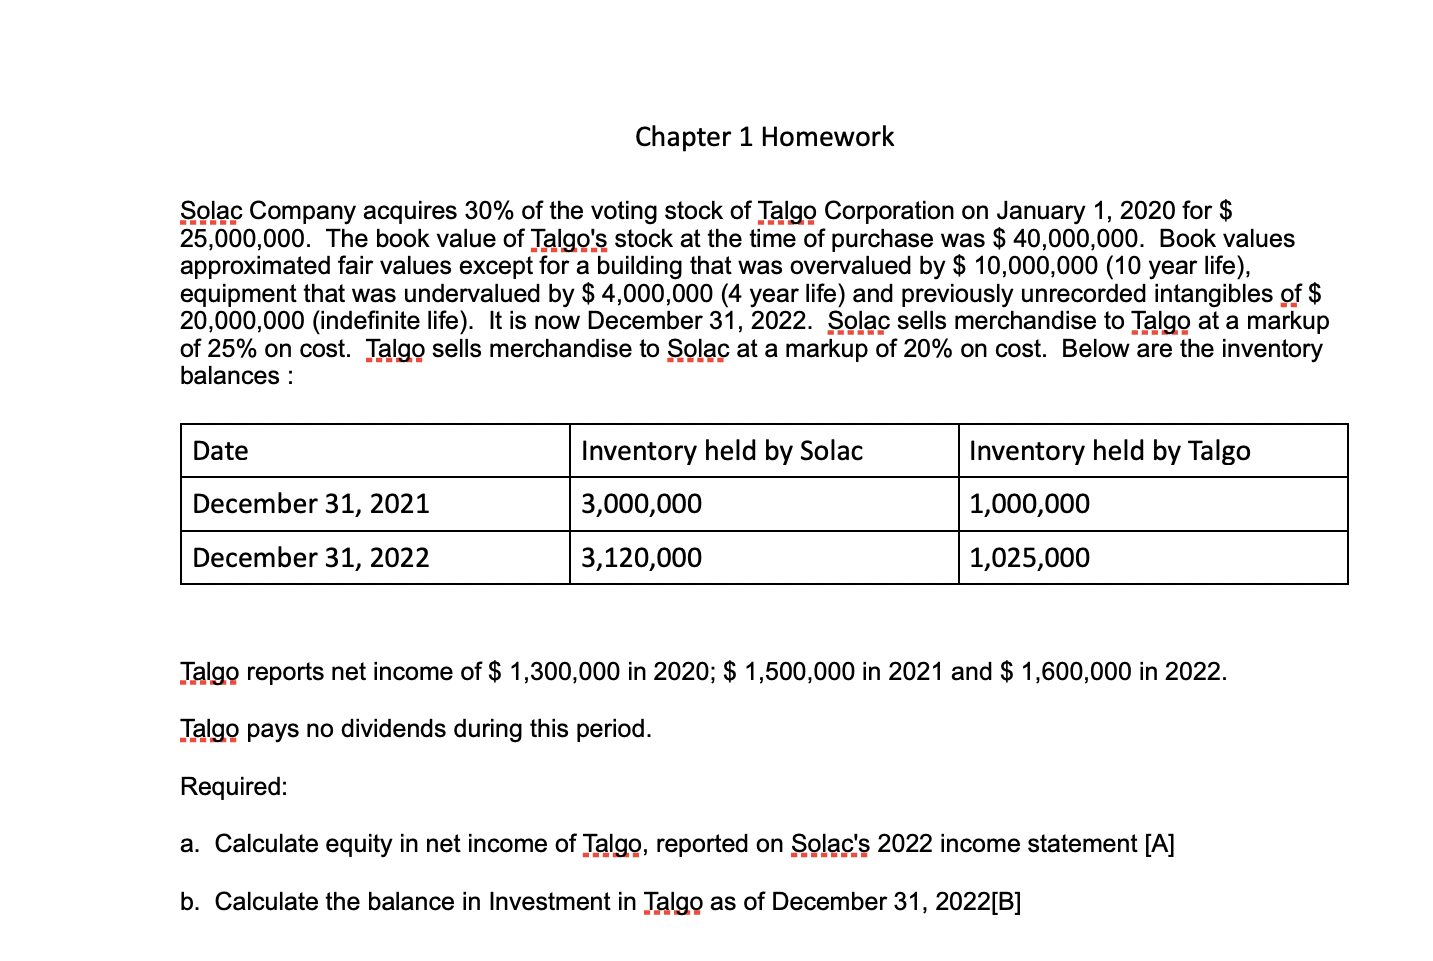 Solac Company acquires 30% of the voting stock of Talgo Corporation on January 1, 2020 for $ 25,000,000. The